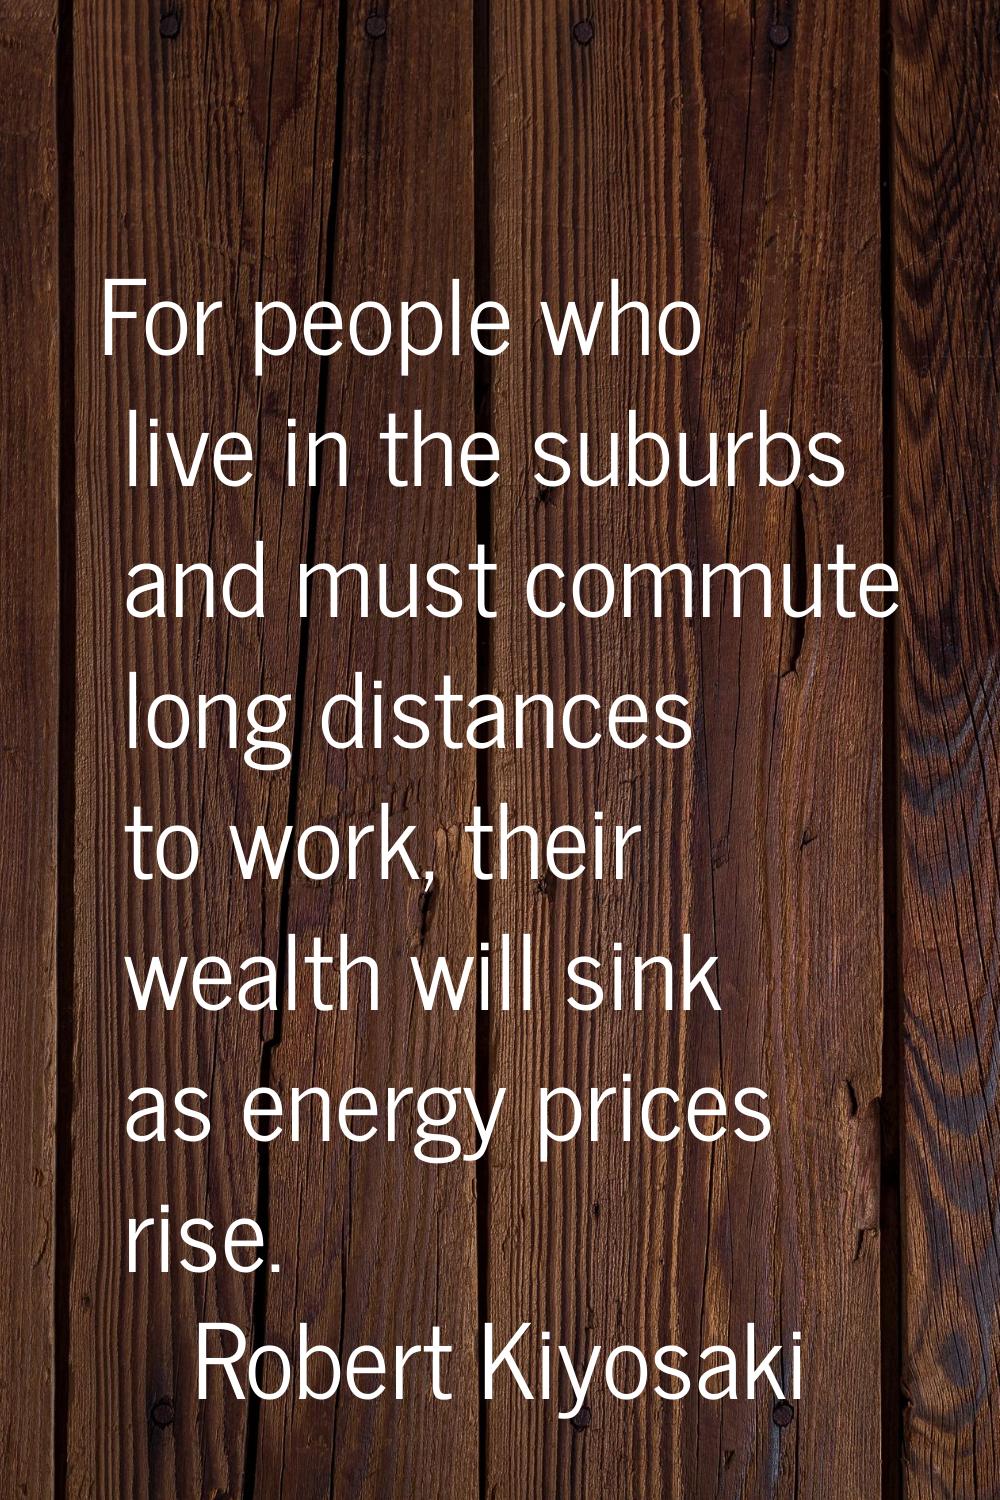 For people who live in the suburbs and must commute long distances to work, their wealth will sink 